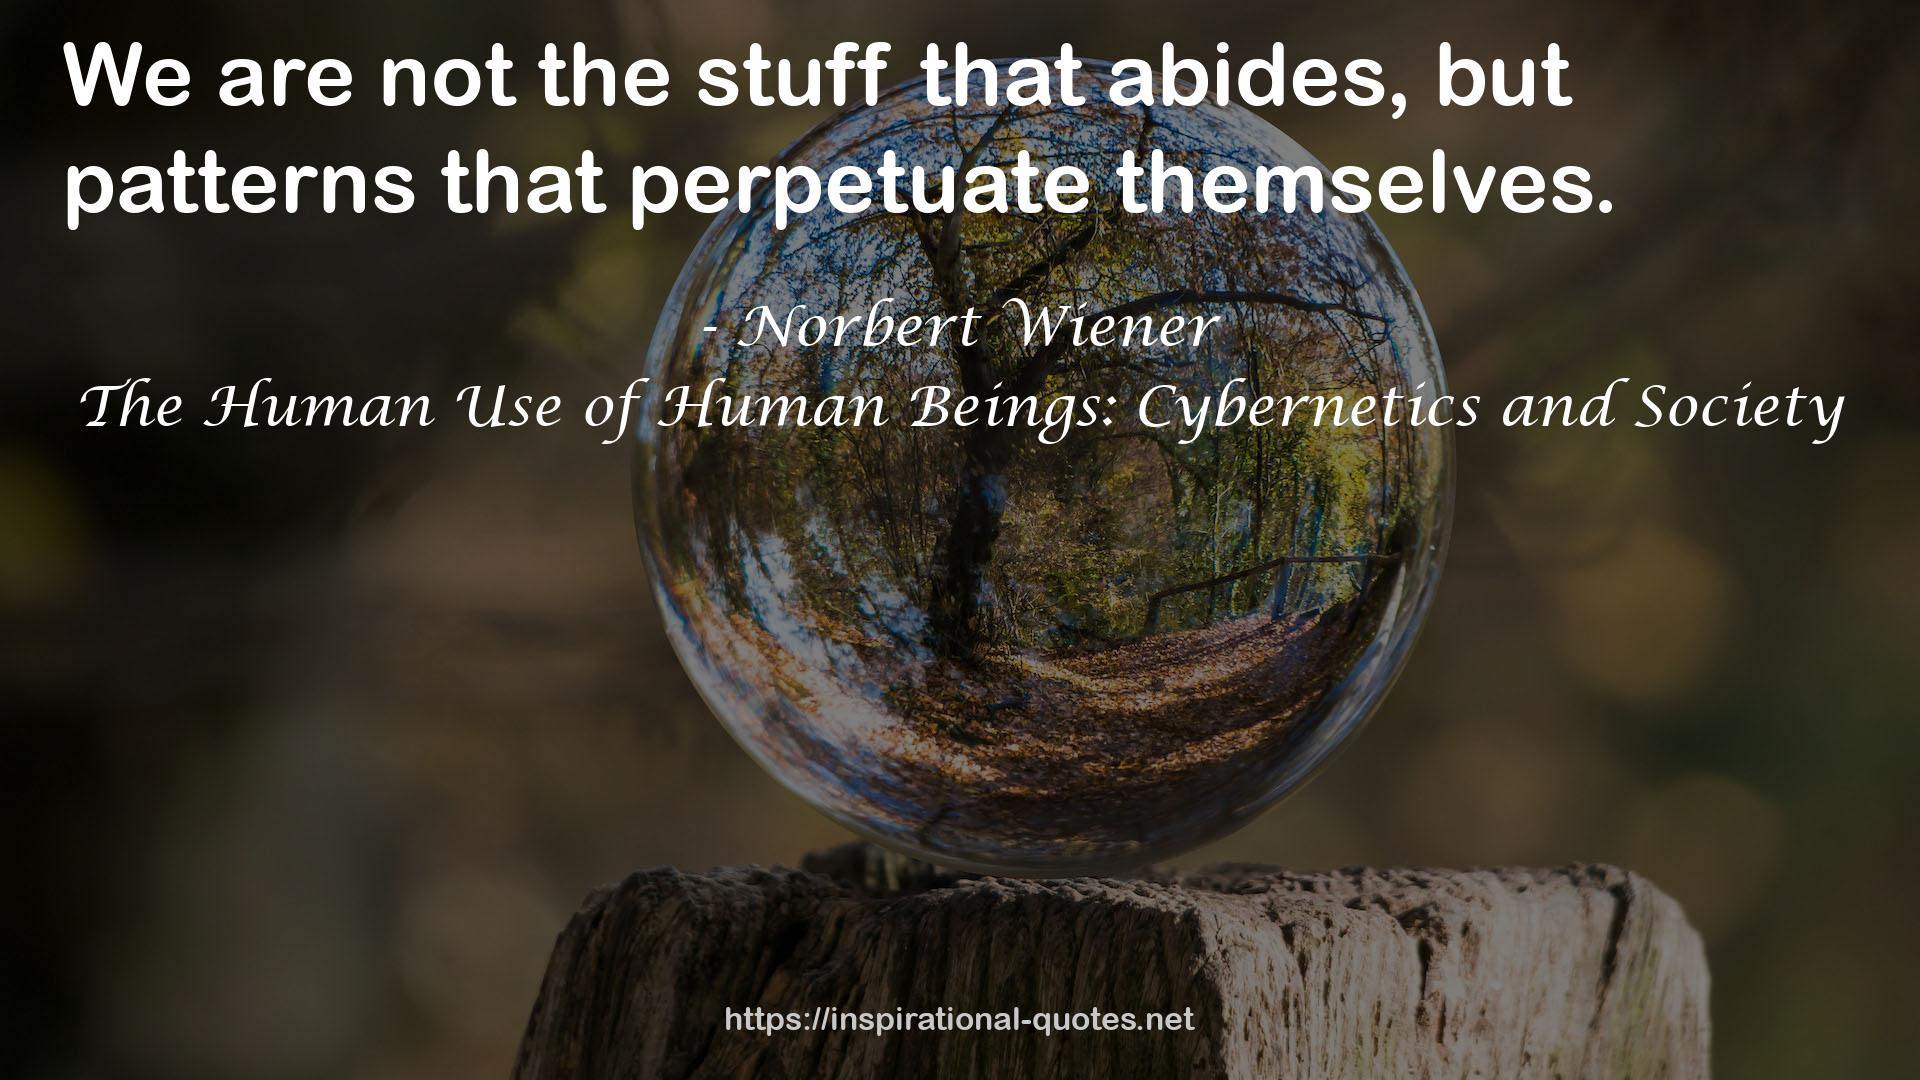 The Human Use of Human Beings: Cybernetics and Society QUOTES